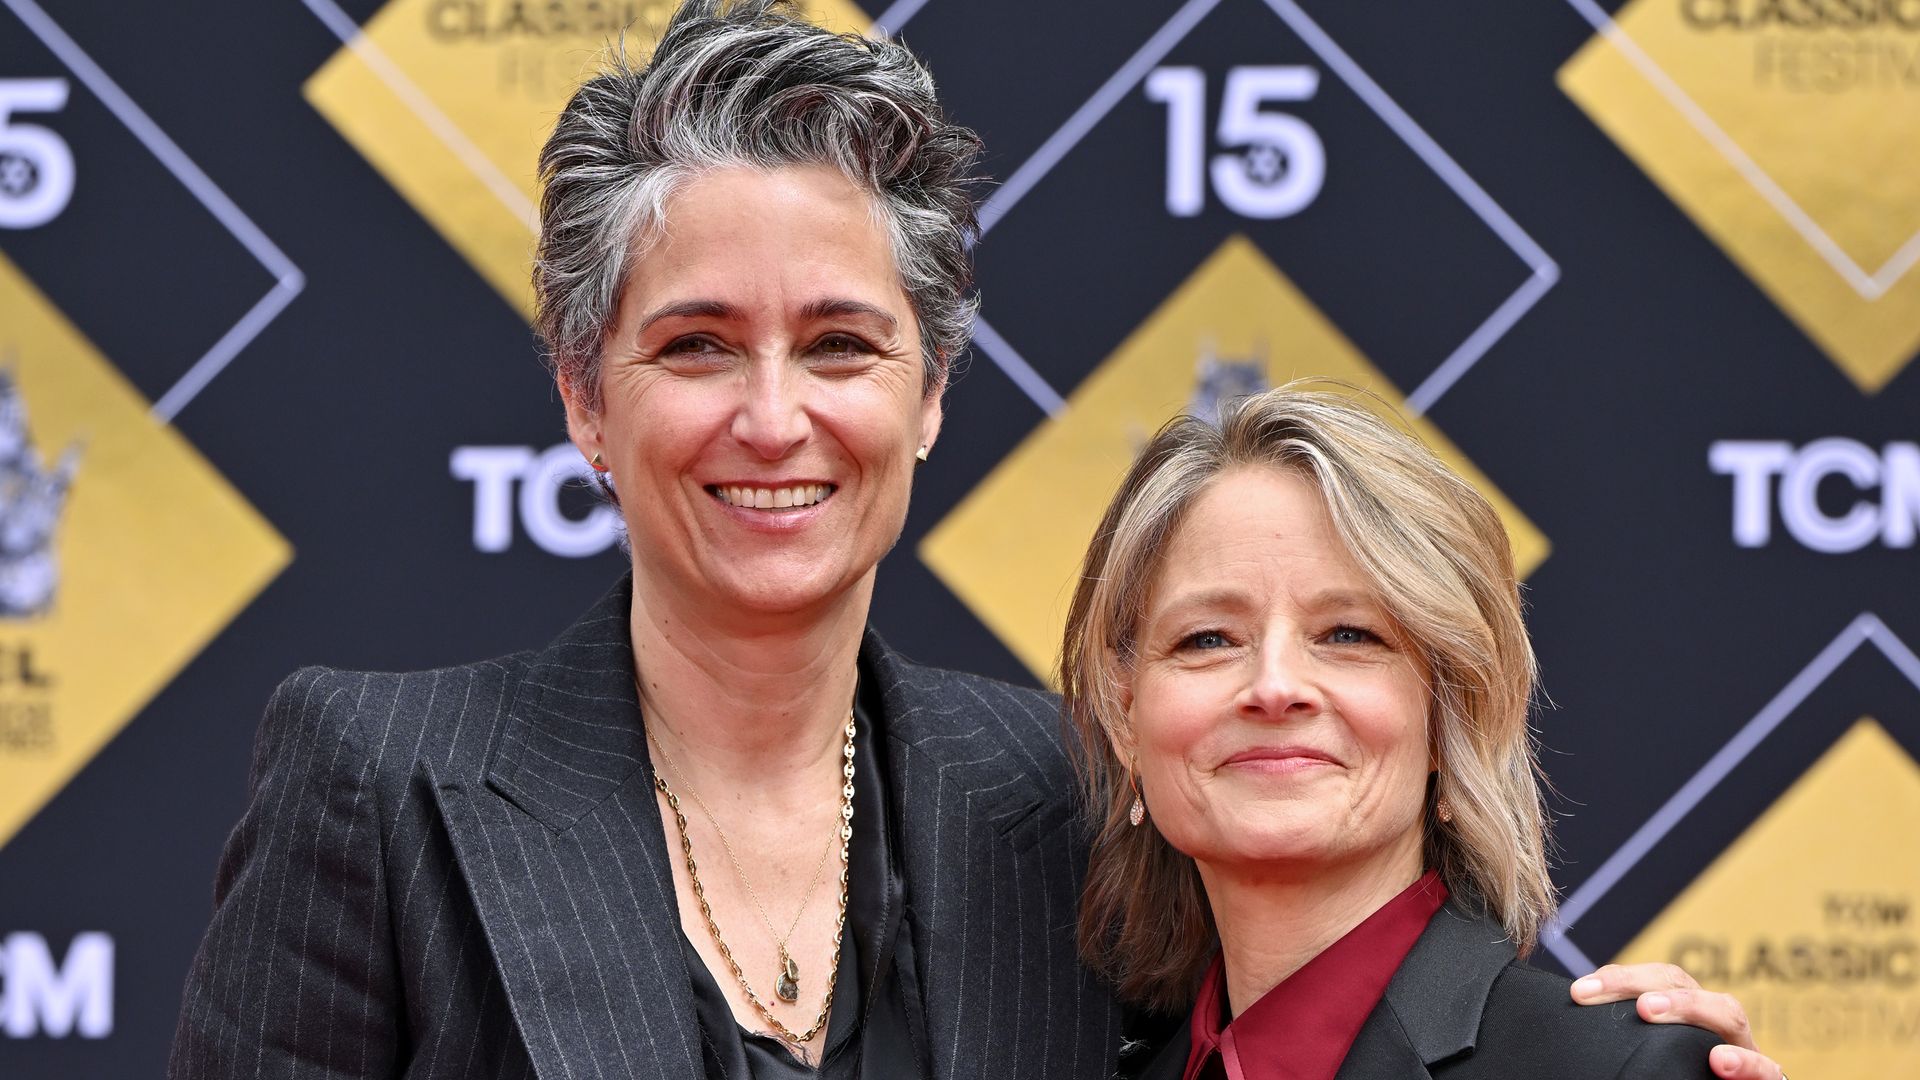 Jodie Foster brings famous wife to tears with rare comment about their 10-year marriage